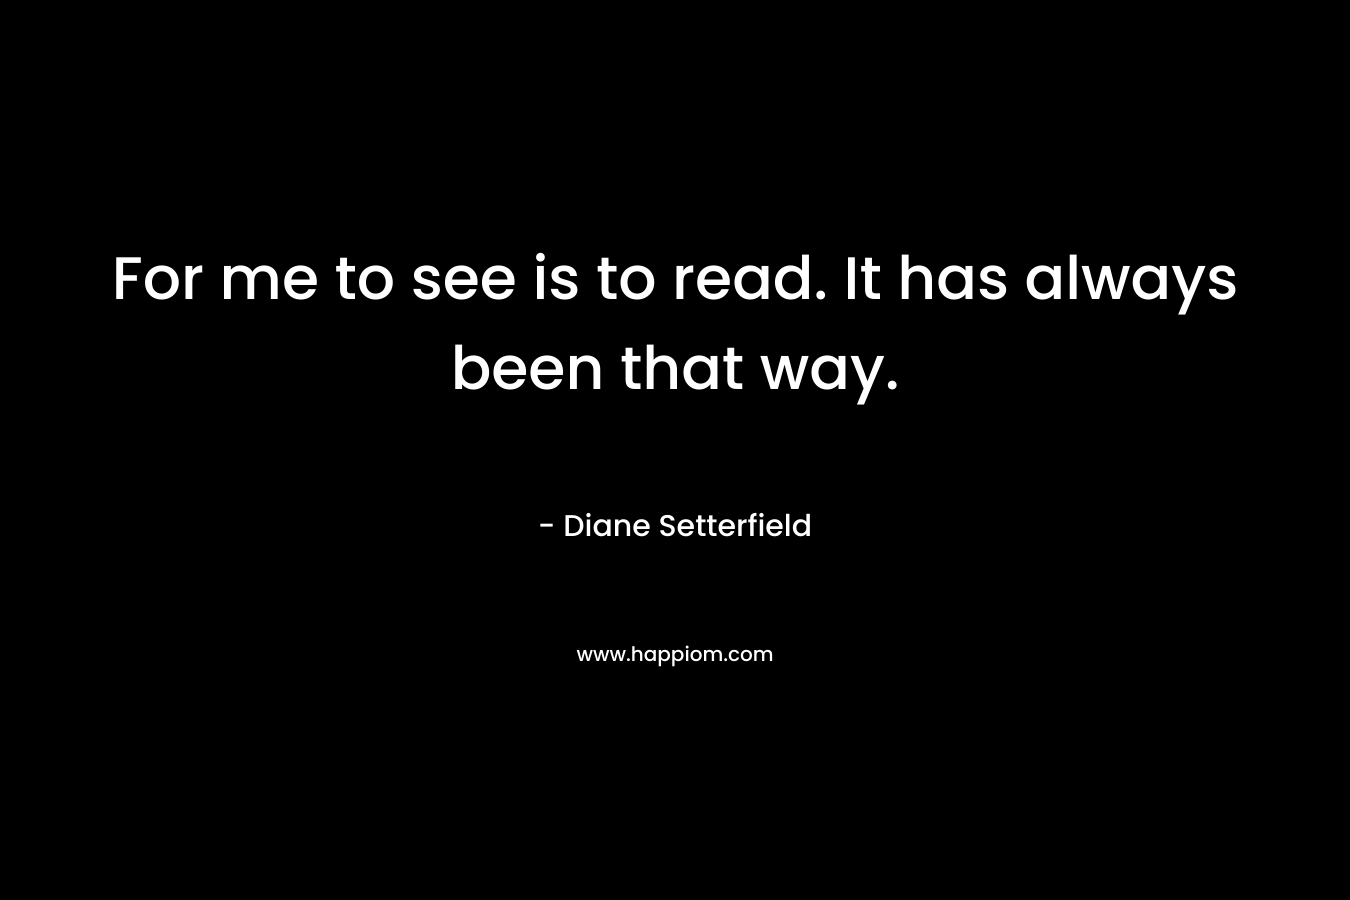 For me to see is to read. It has always been that way.